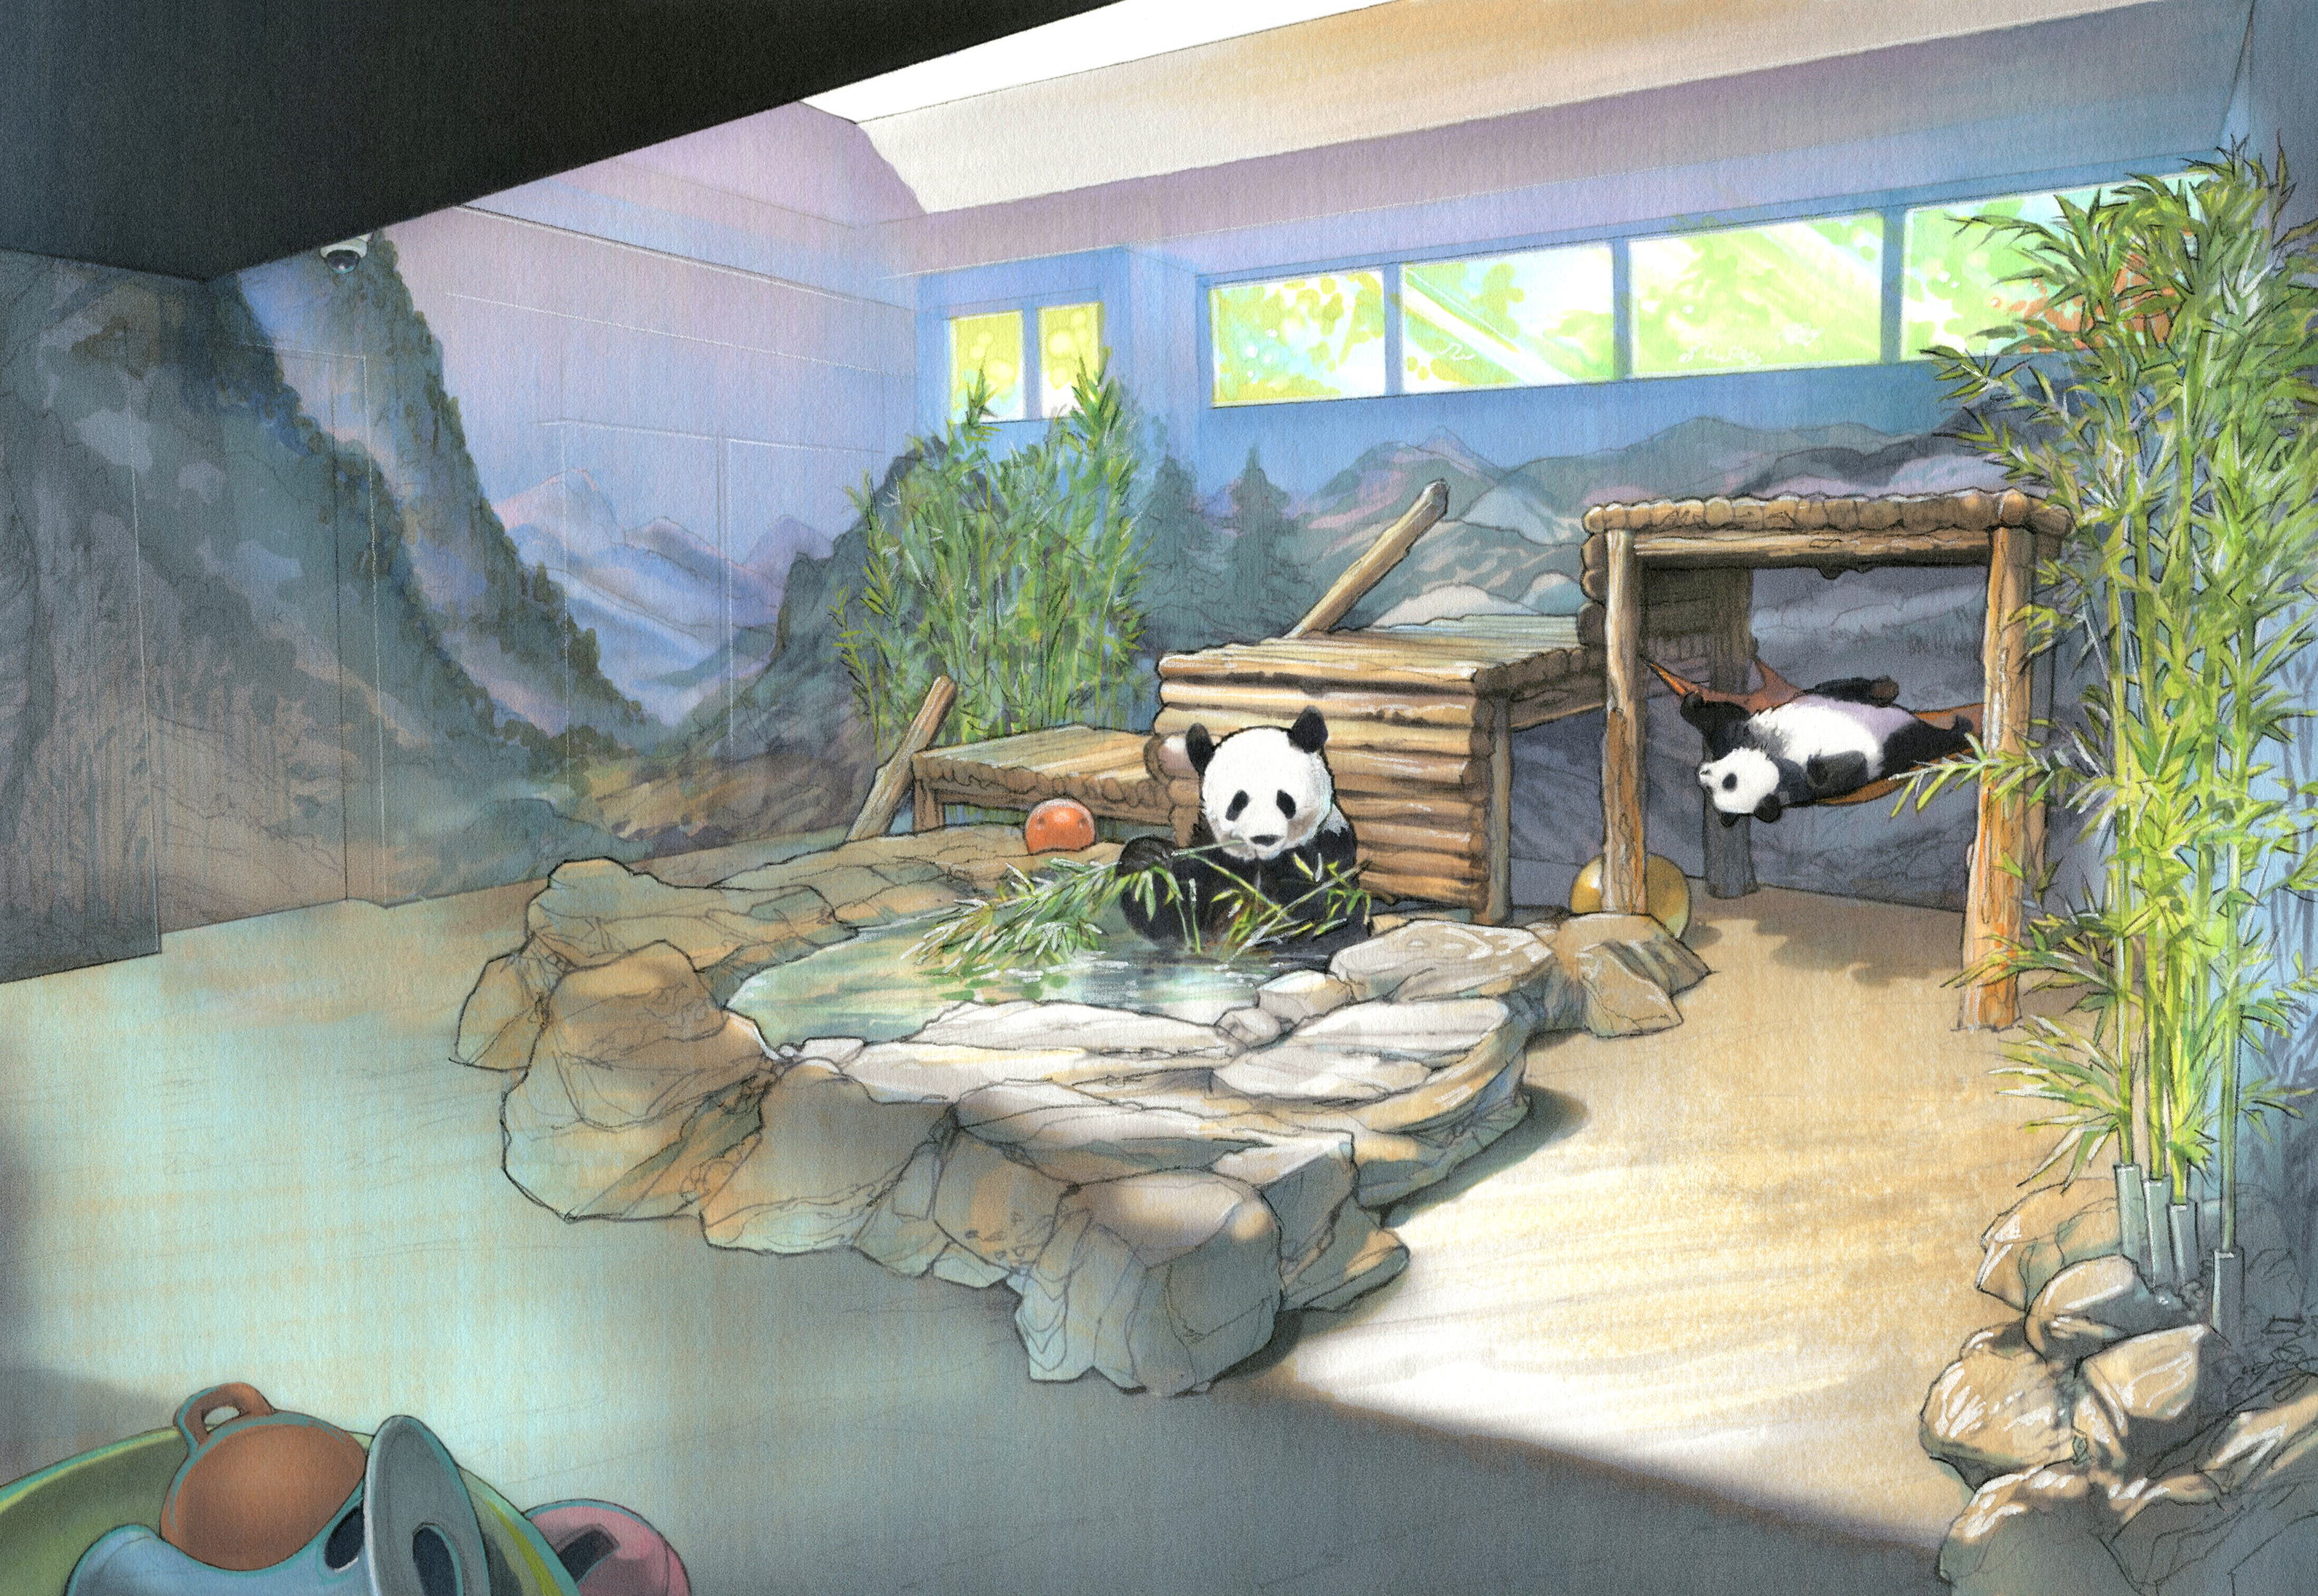 An illustration of two pandas enjoying a newly renovated indoor habitat with a rock-lined pool, bamboo stands, climbing structures and enrichment toys.